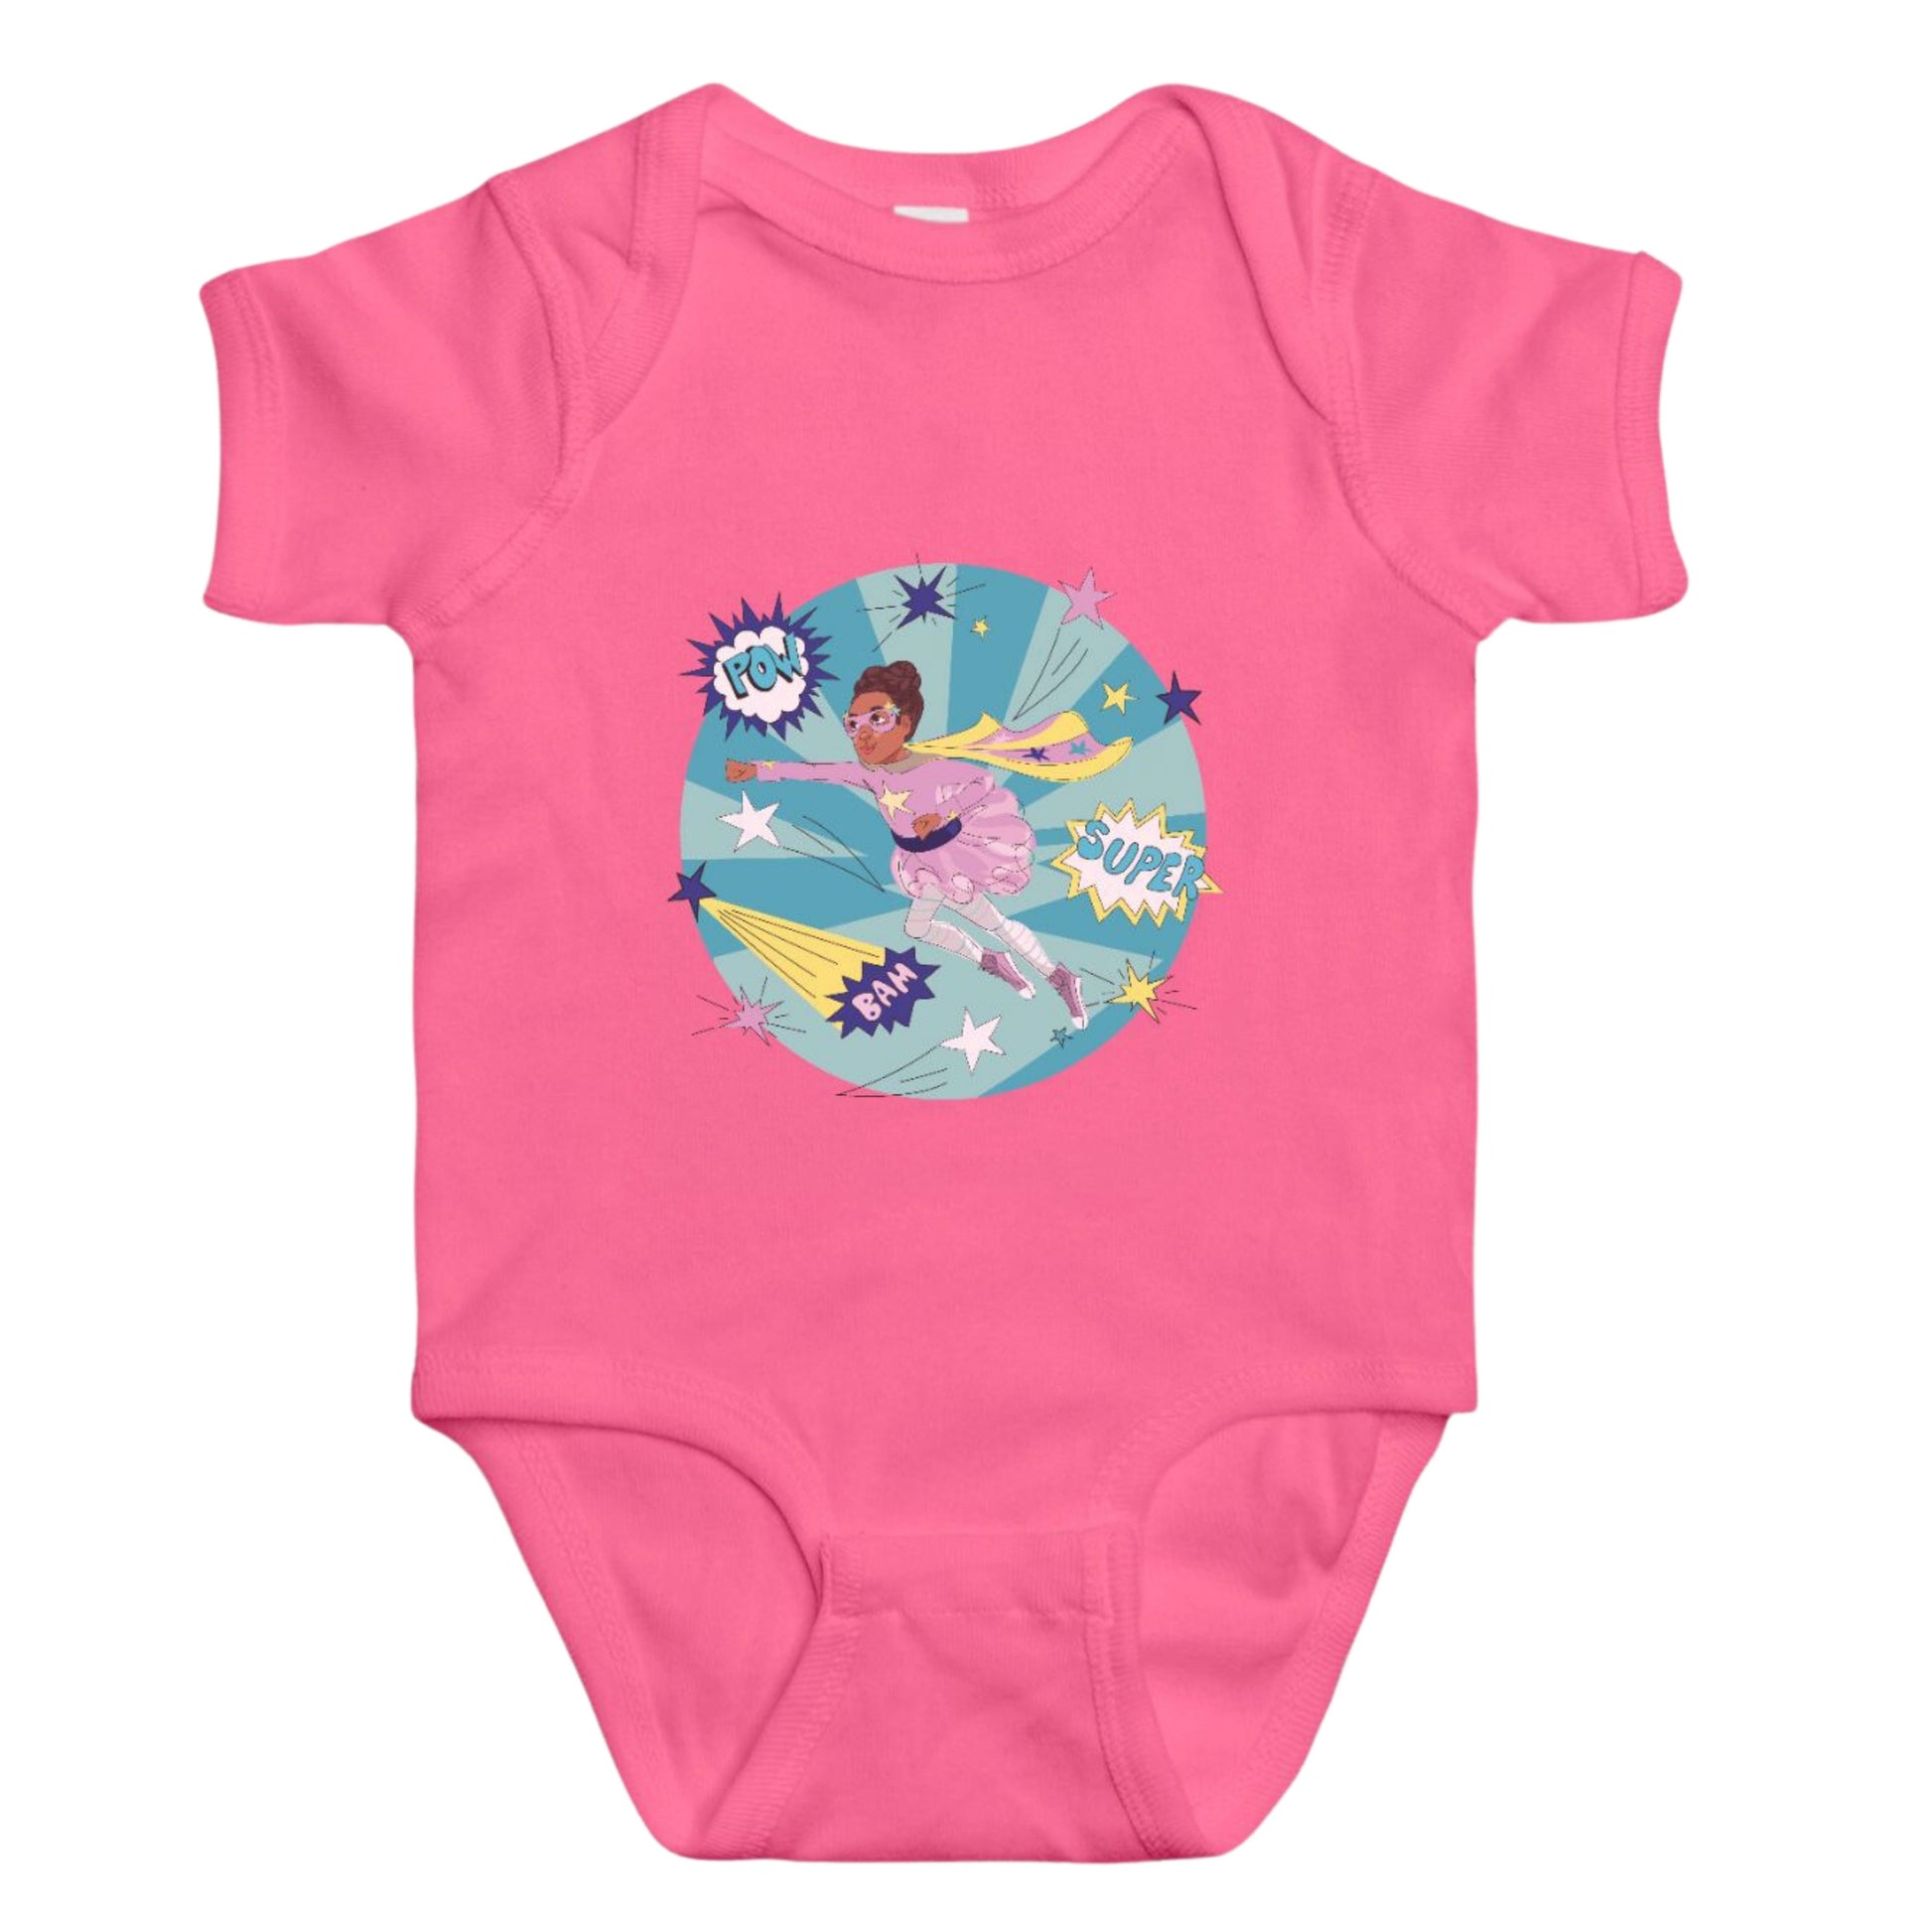 Supergirl Baby Clothing One Piece | 6-18 months